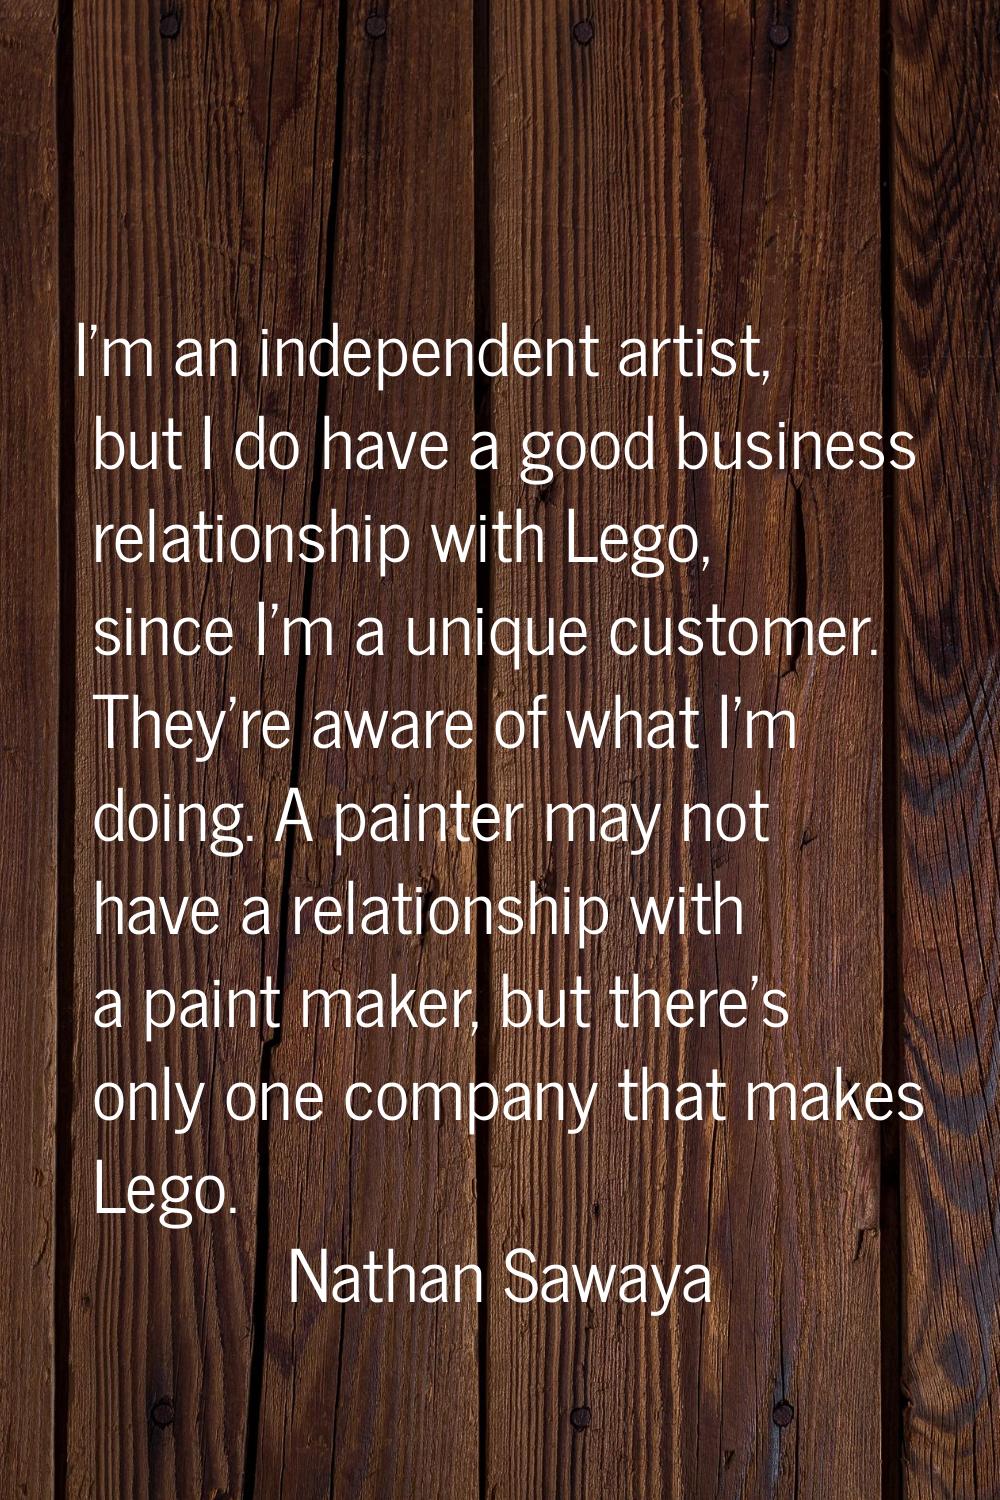 I'm an independent artist, but I do have a good business relationship with Lego, since I'm a unique